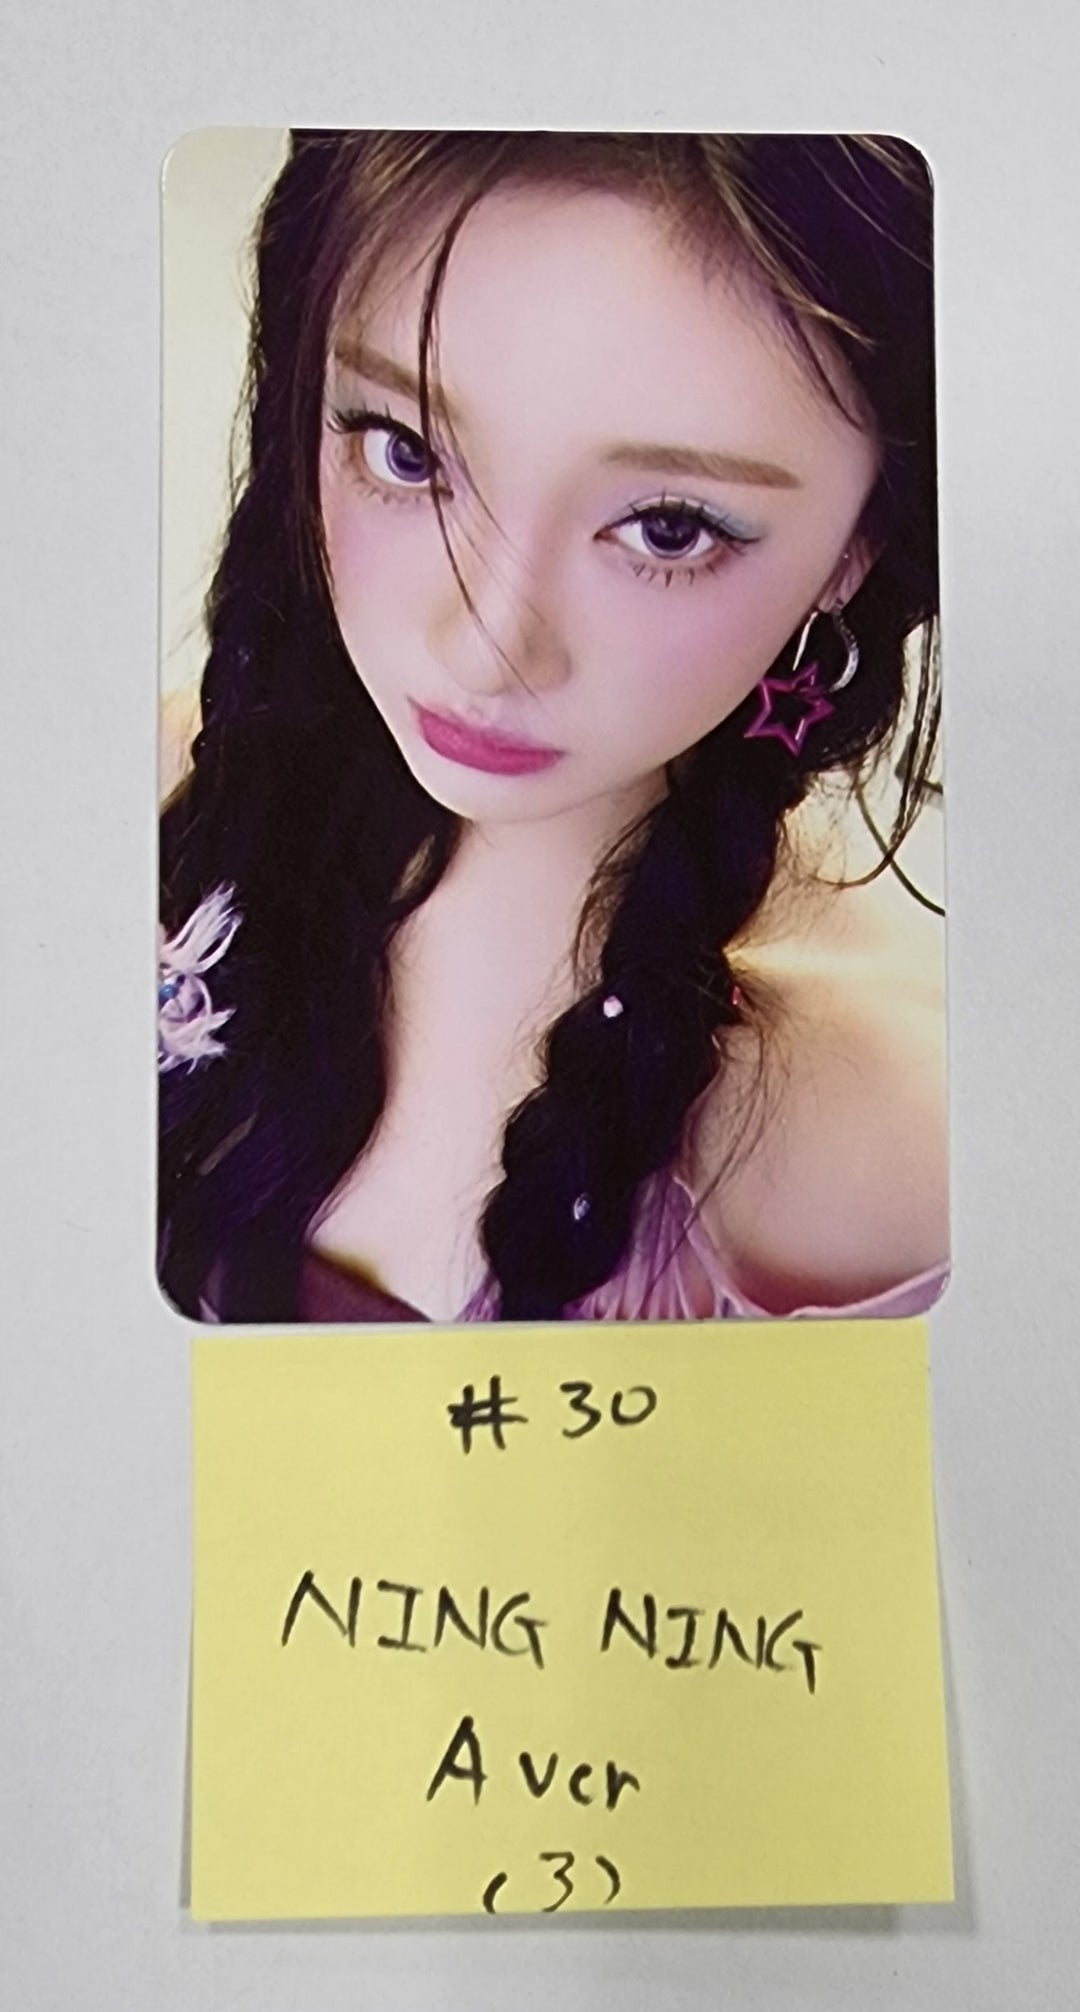 Aespa "Better Things" - Smtown & Store Official Random Trading Photocard [A + B Ver] [23.11.09]